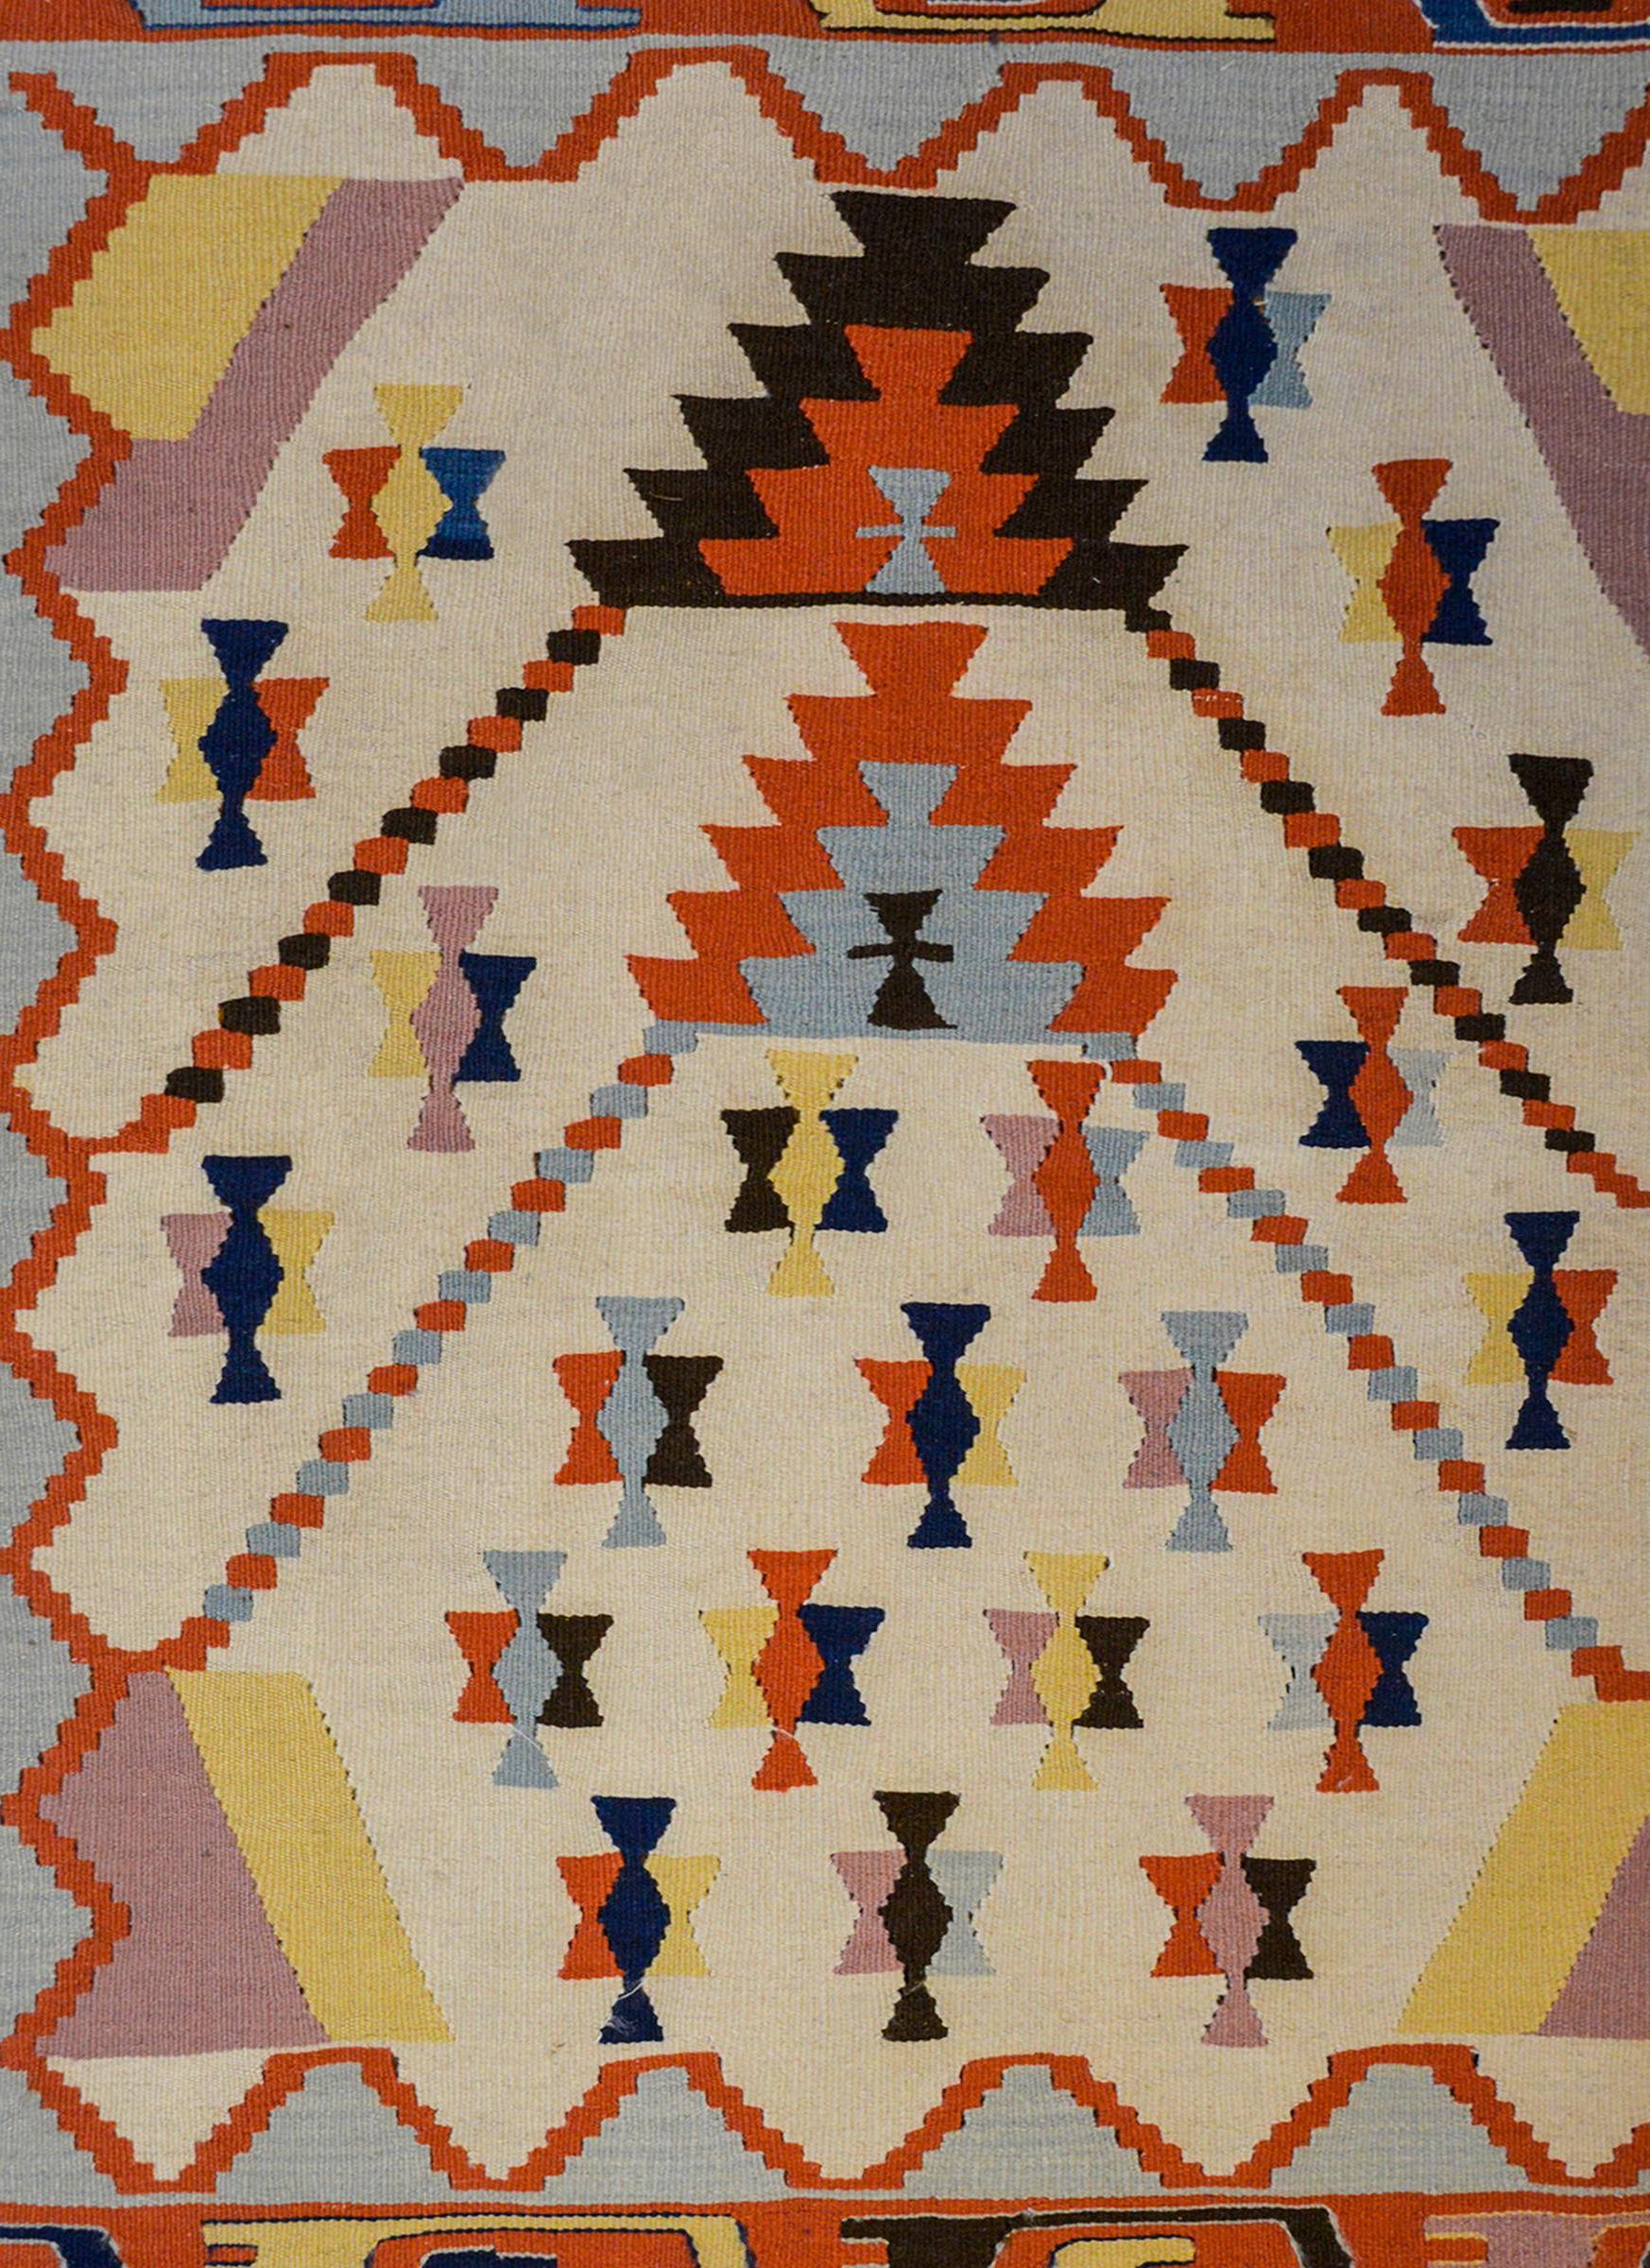 A fun vintage Indian Dhurrie Kilim rug with a bold geometric pattern woven in light and dark indigo, crimson gold, black and white wool surrounded by a pale indigo and crimson zigzag patterned border.